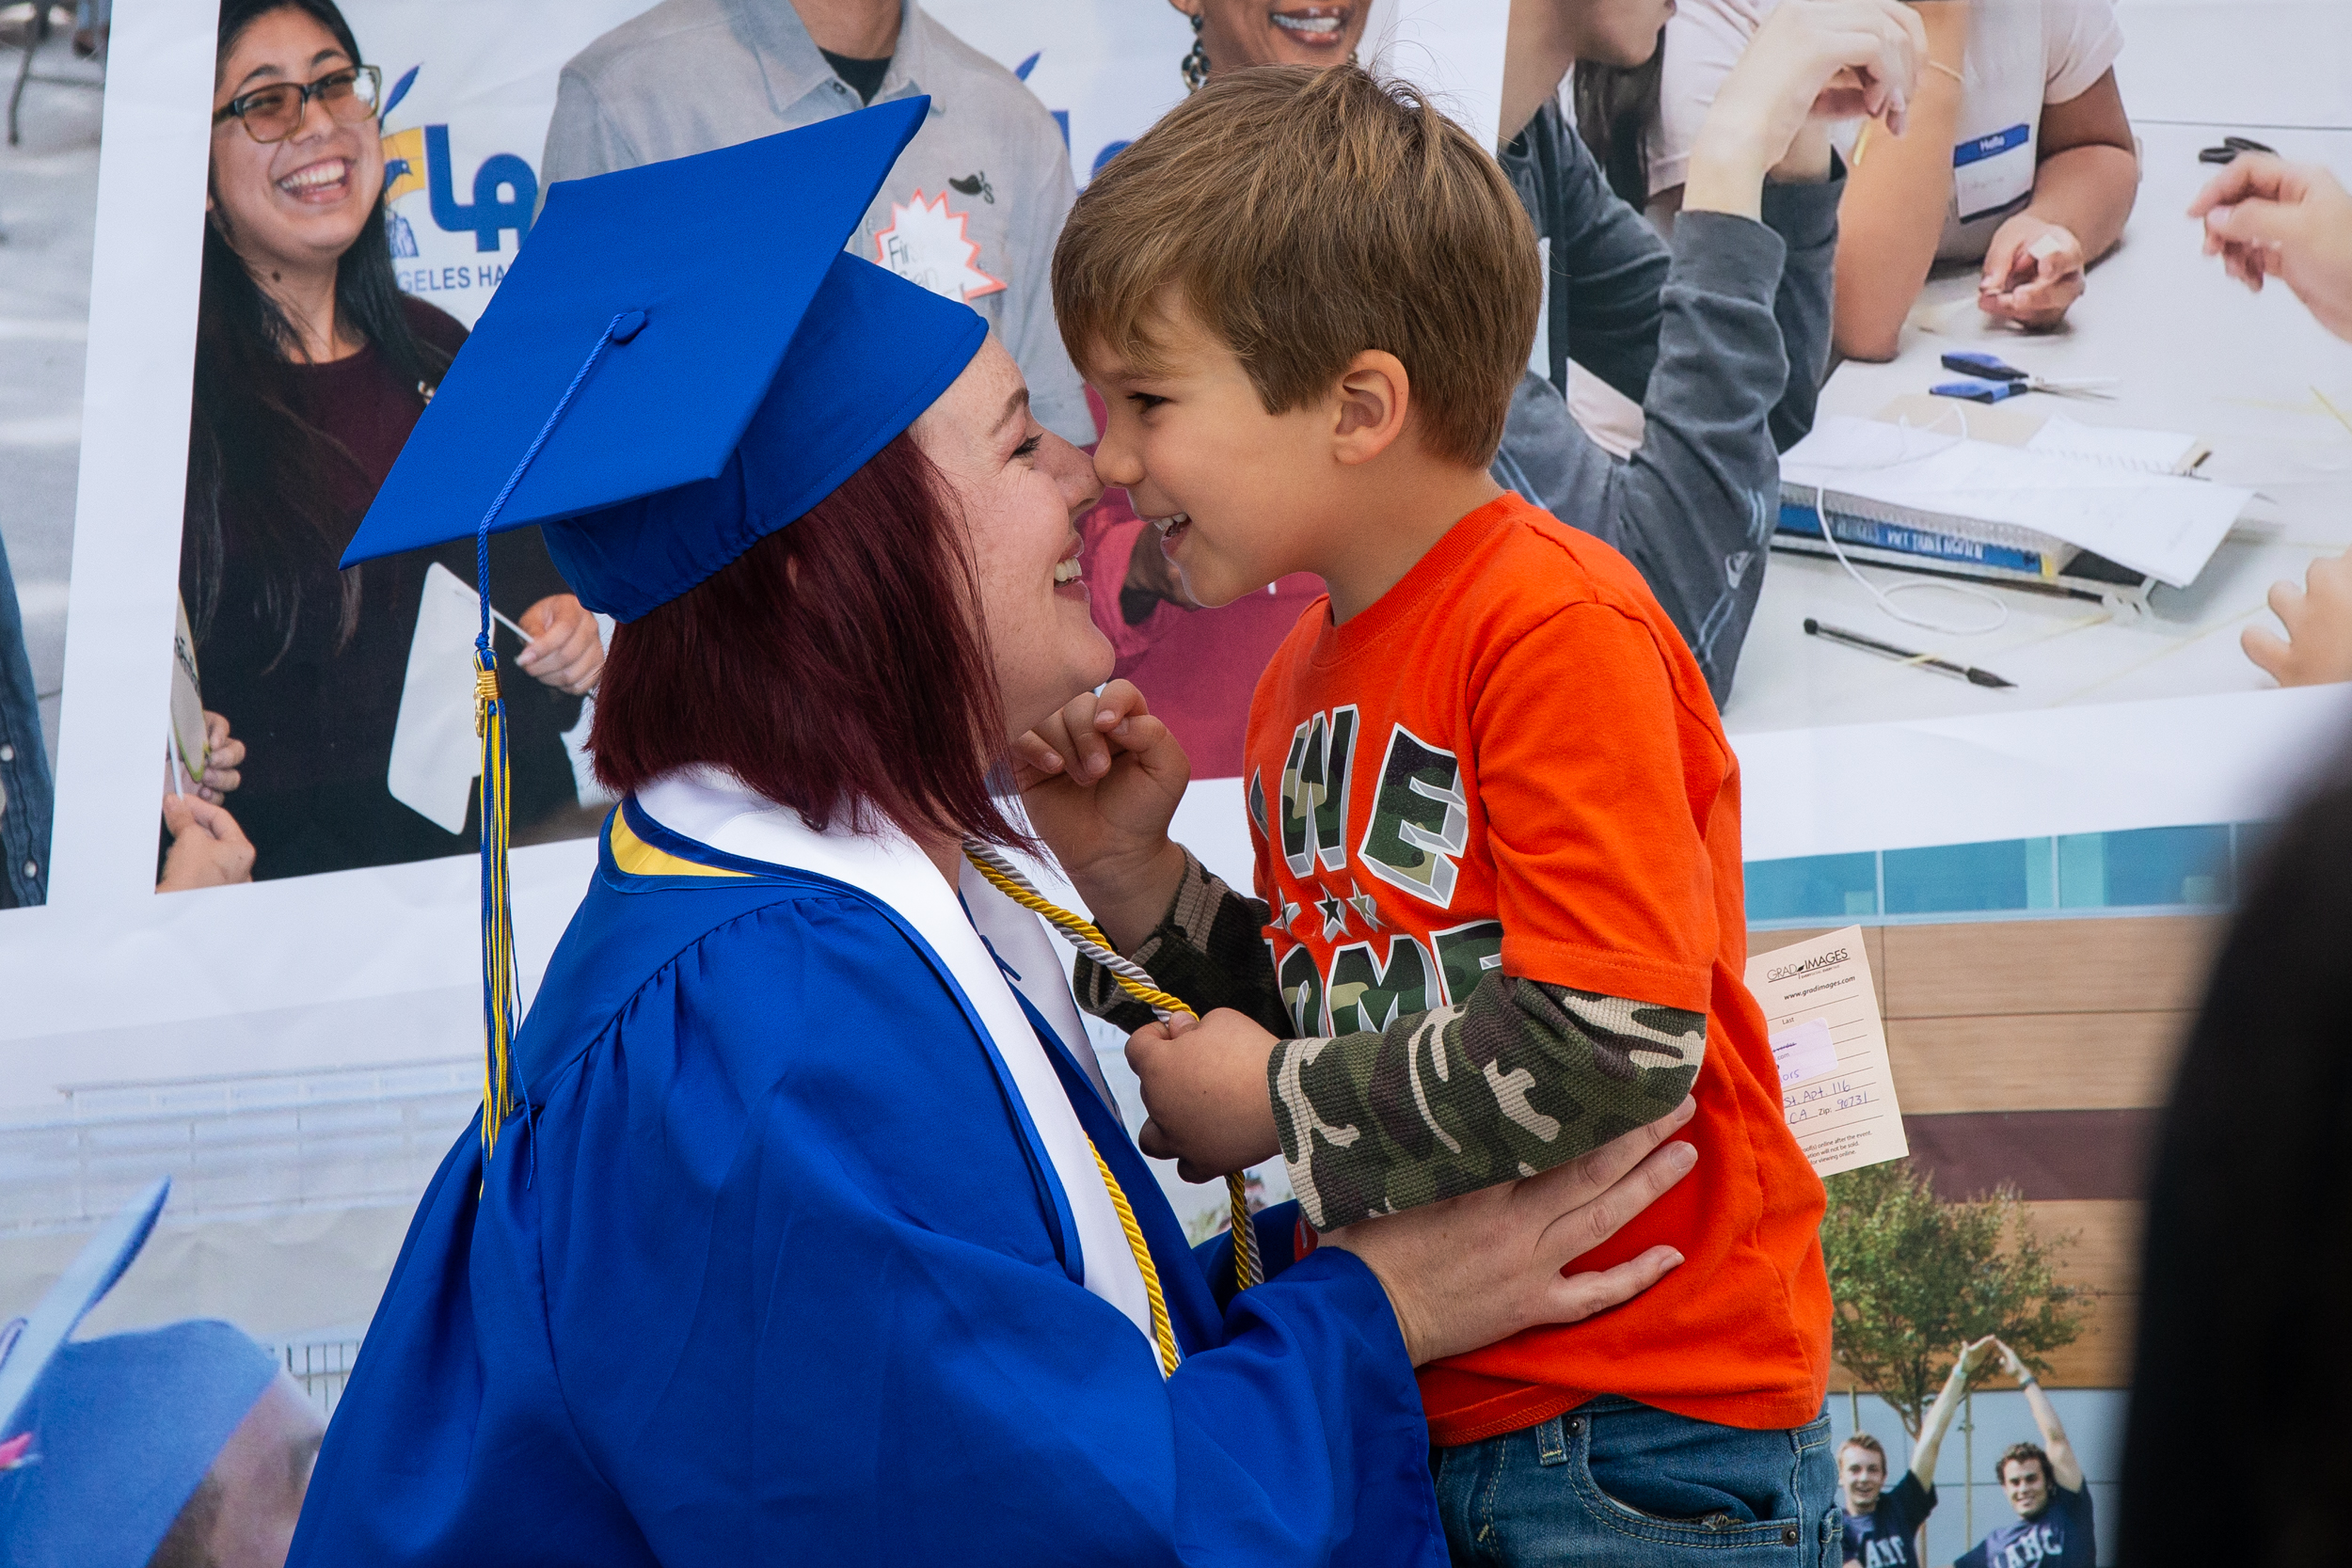 Mother and Son at Graduation